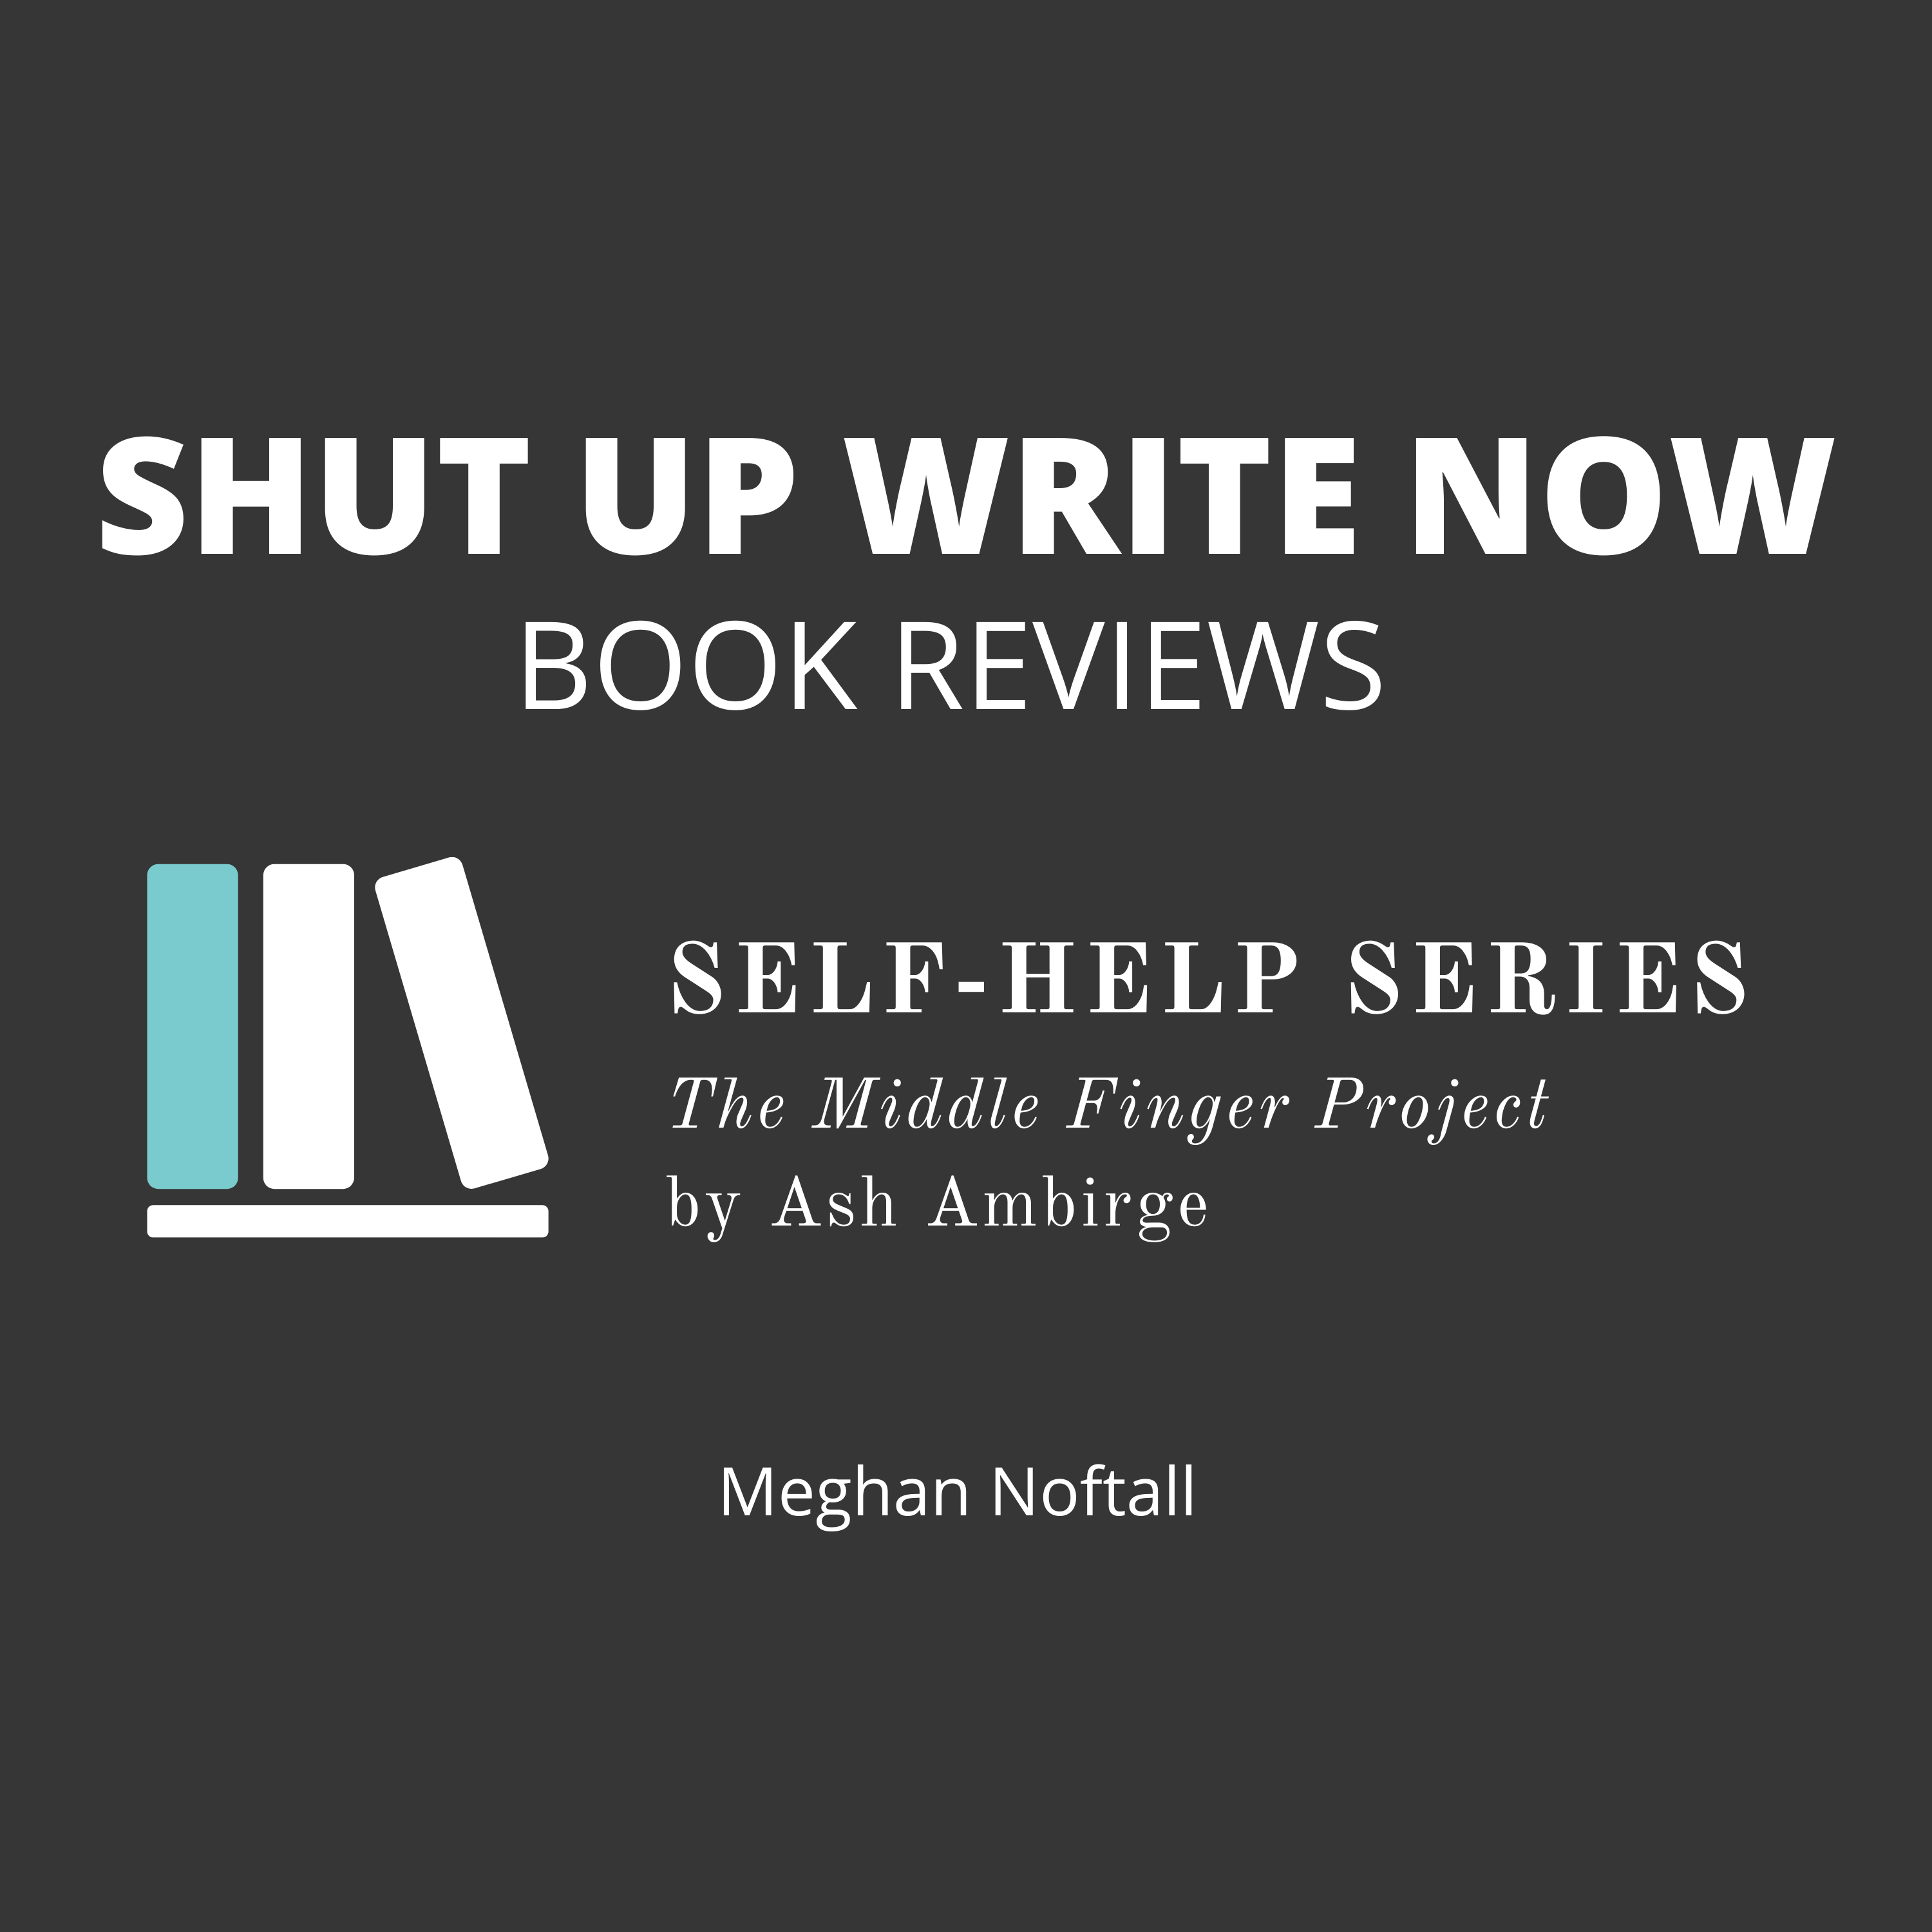 Book Review: The Middle Finger Project by Ash Ambirge